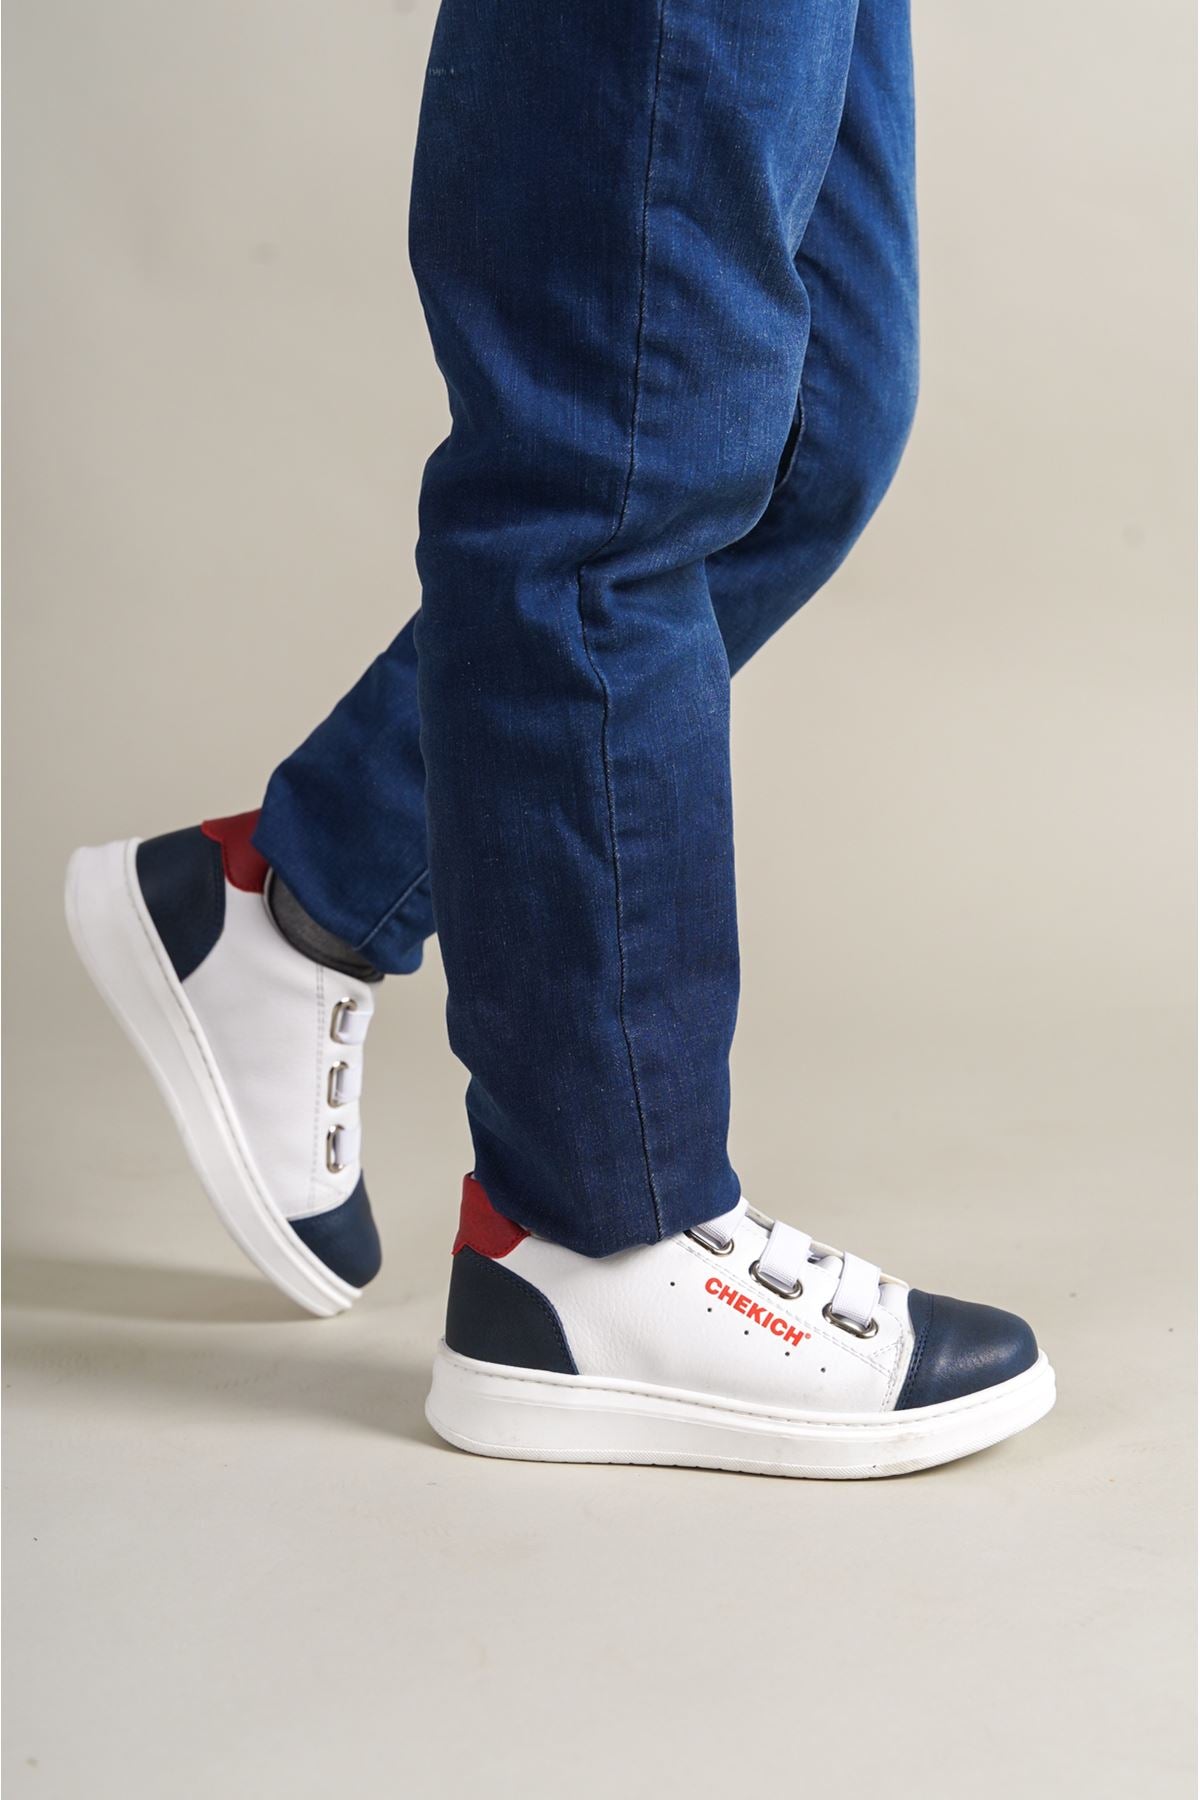 1007 Montana Kids Shoes Navy Blue-White-Red